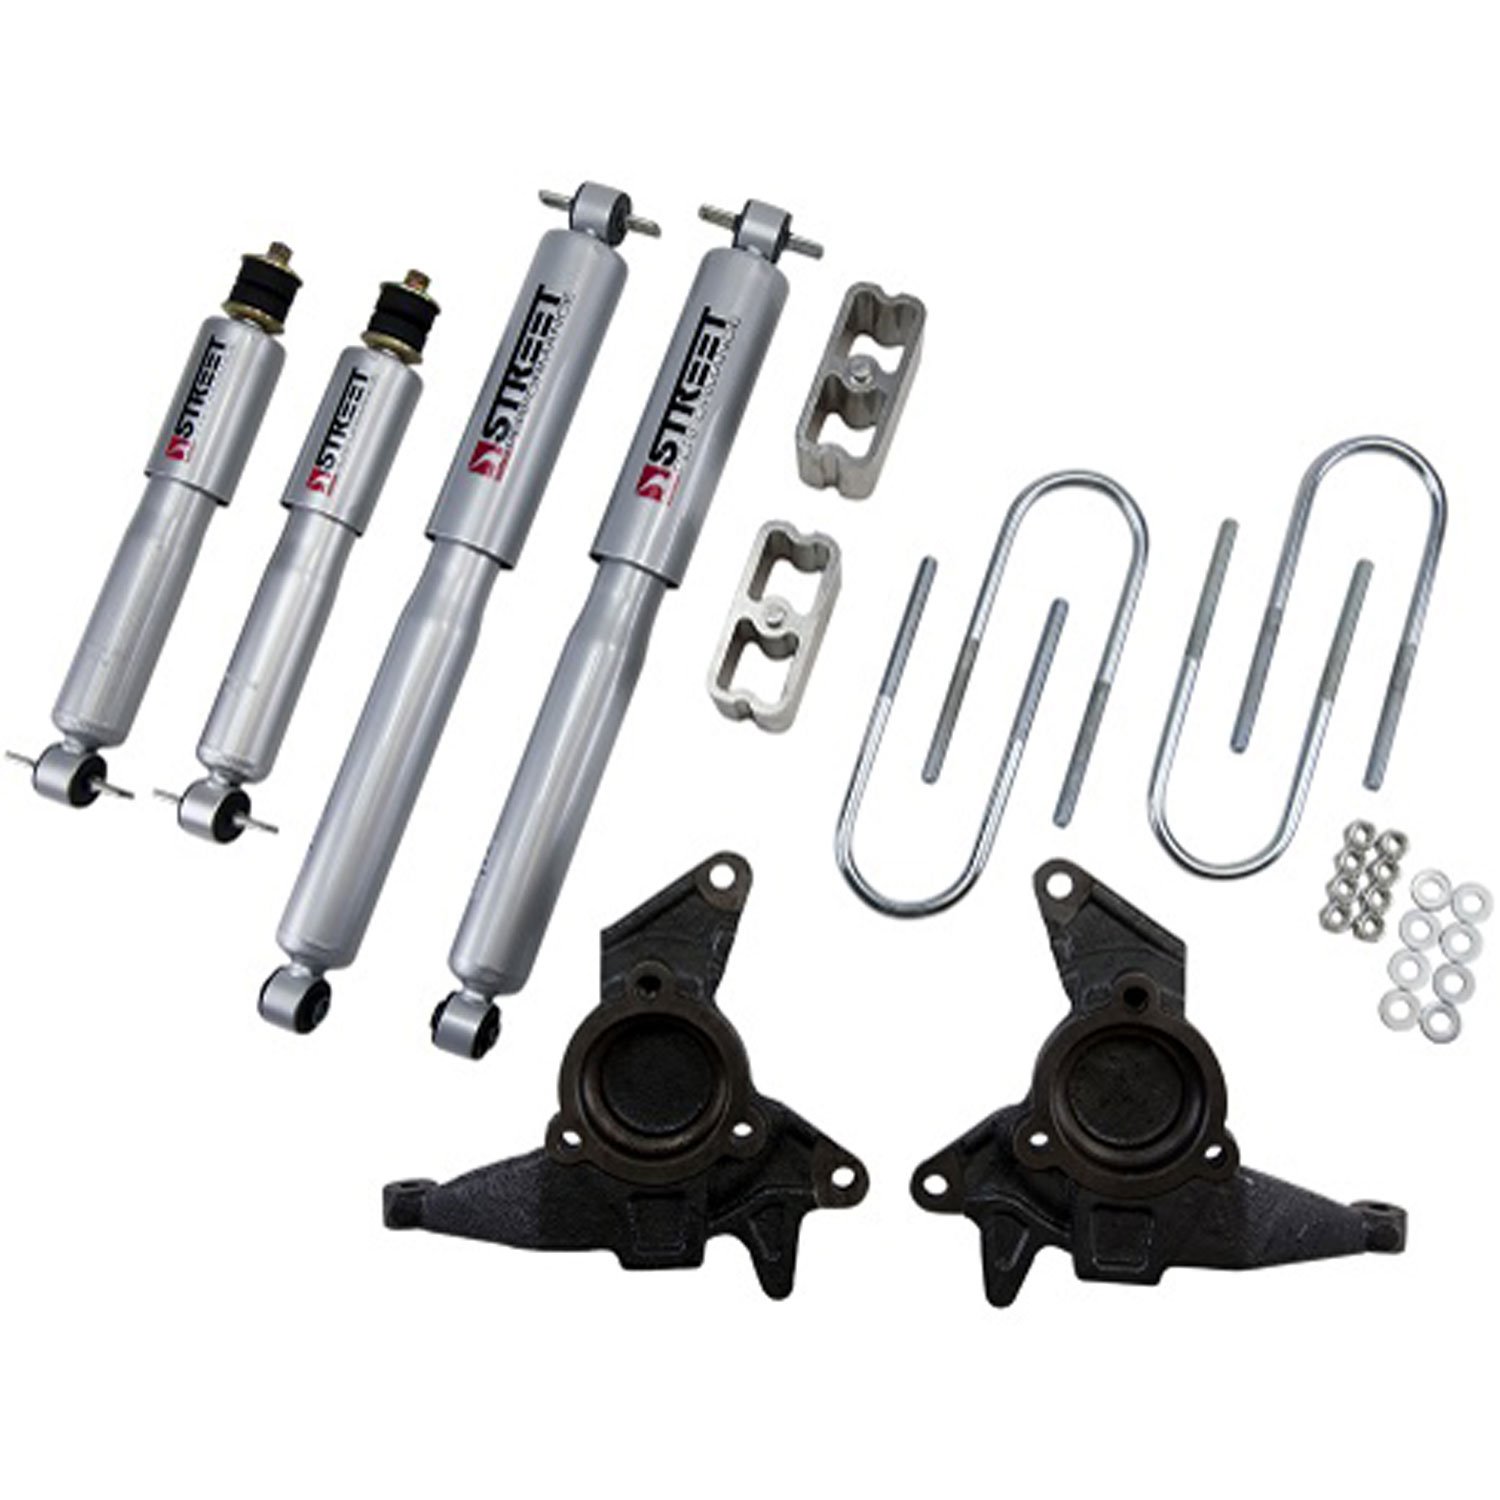 Complete Lowering Kit for 1998-2003 Chevy Blazer/GMC Jimmy